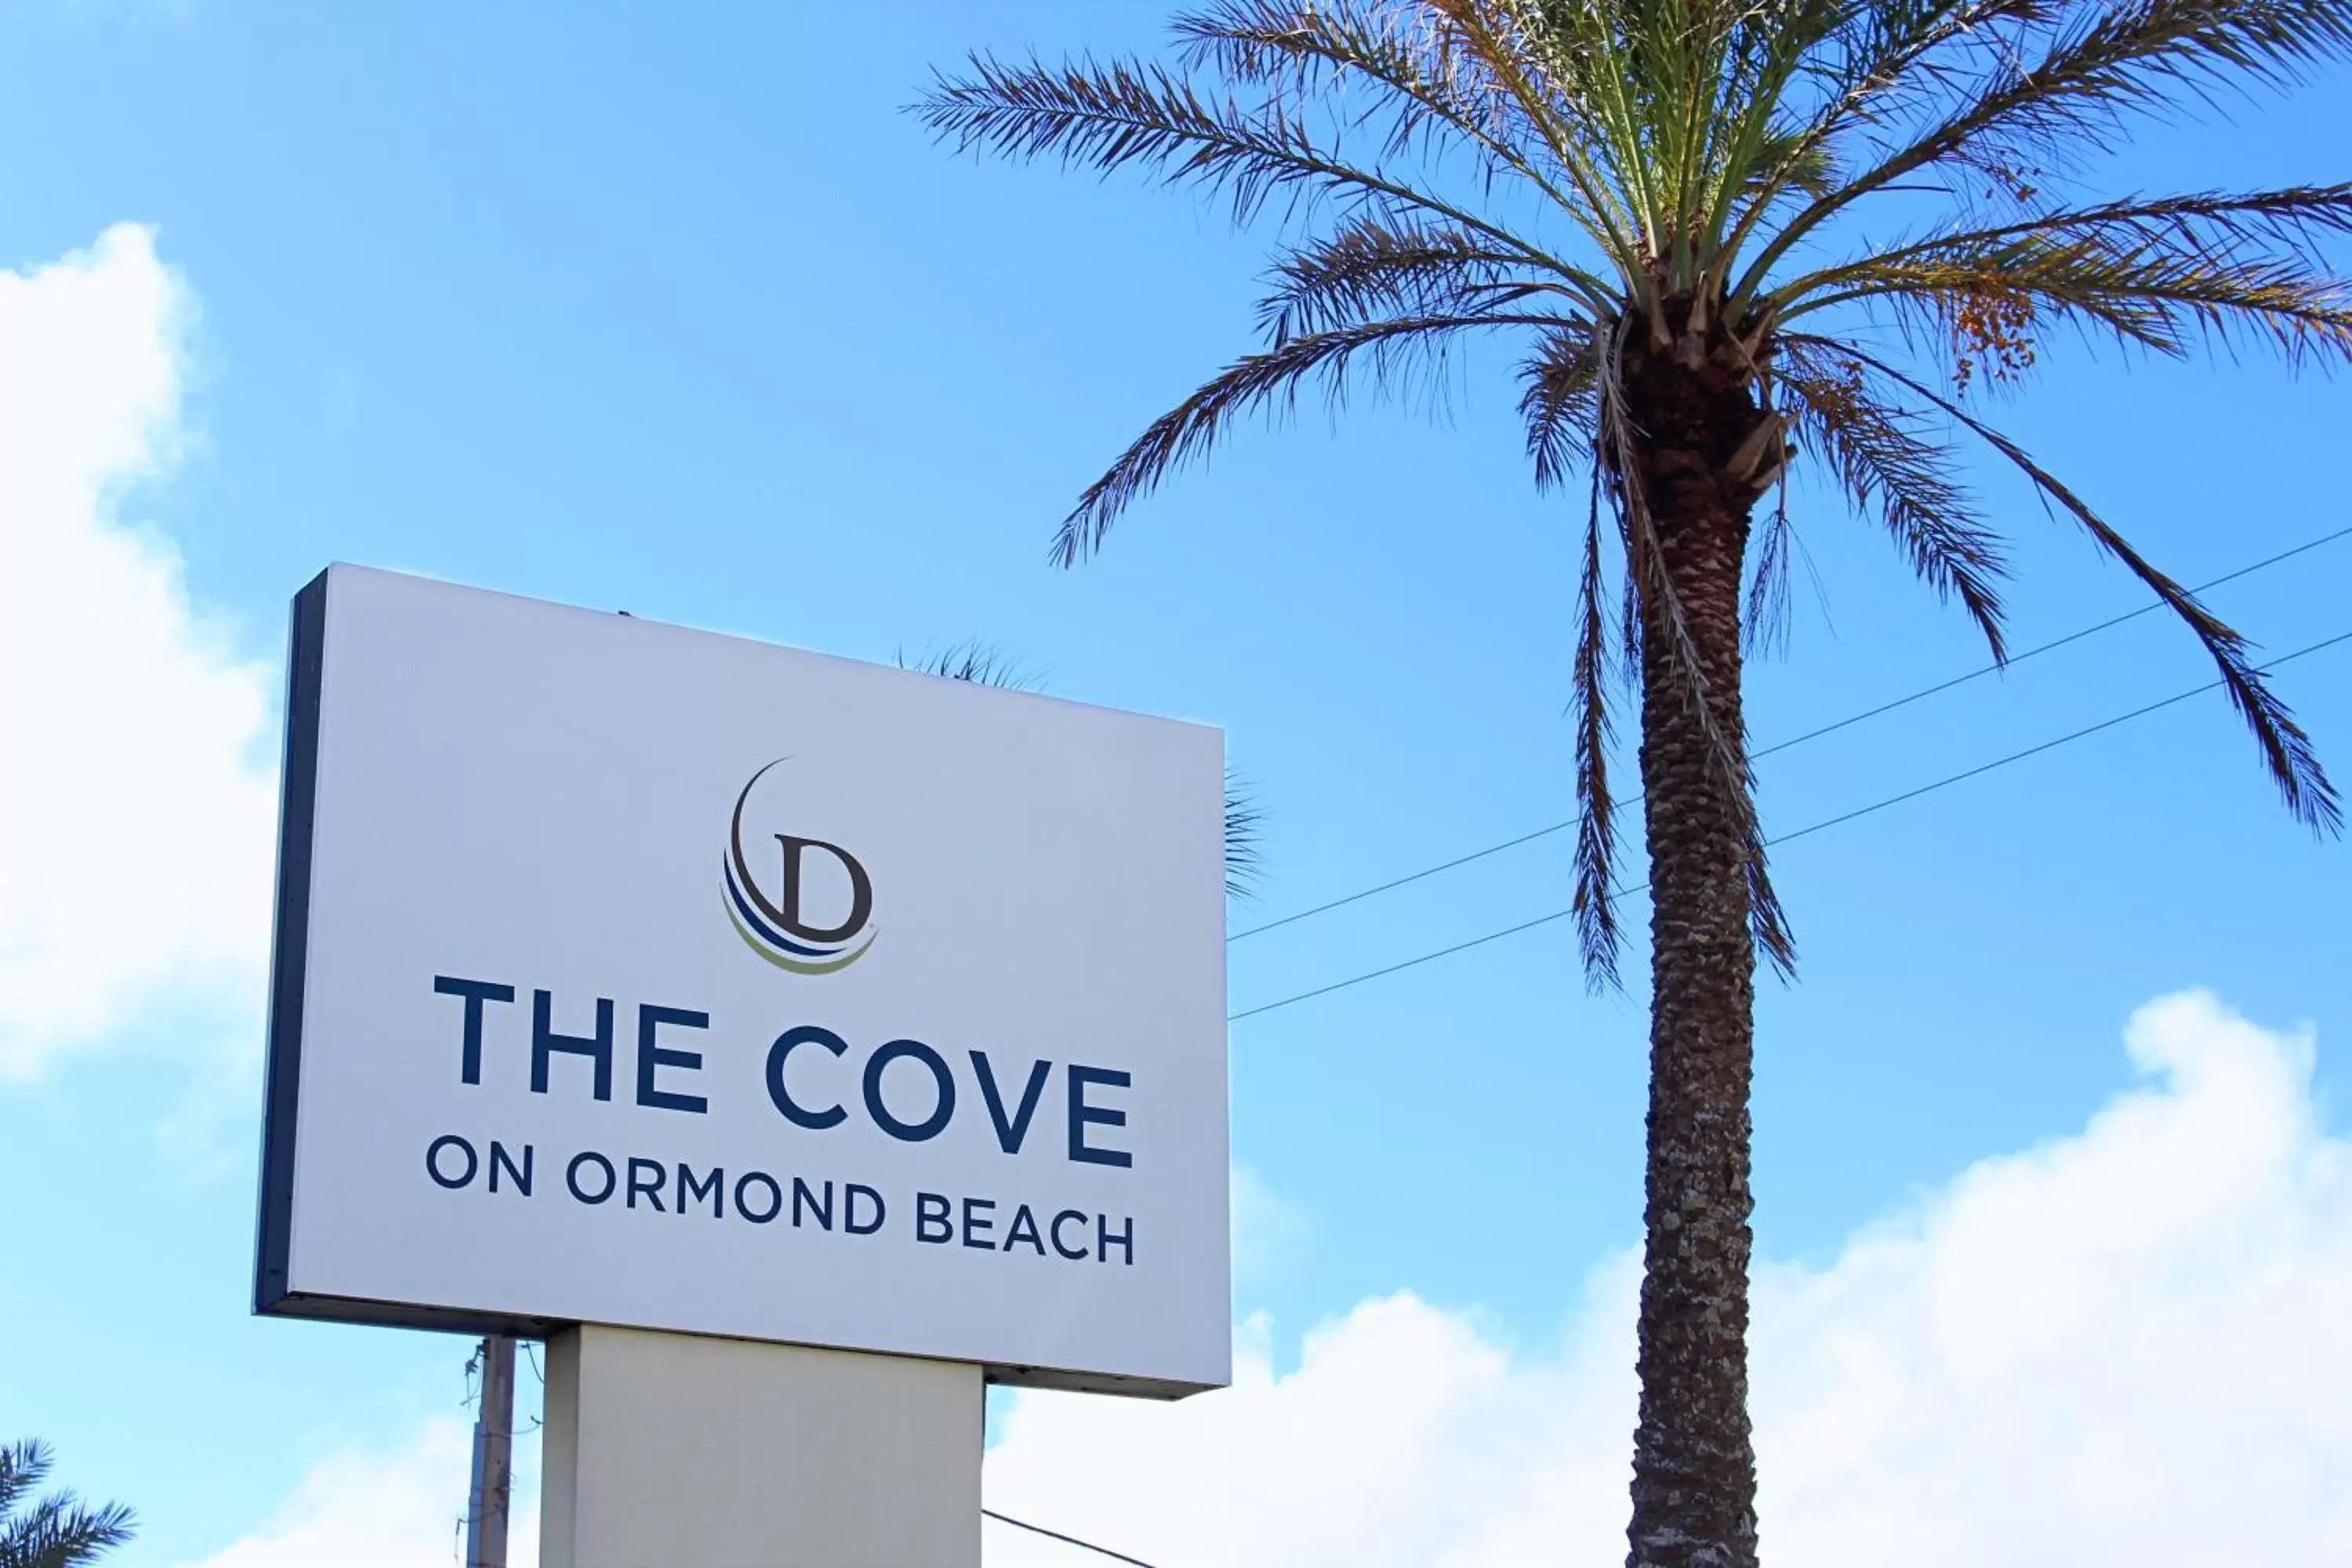 Property logo or sign in The Cove On Ormond Beach